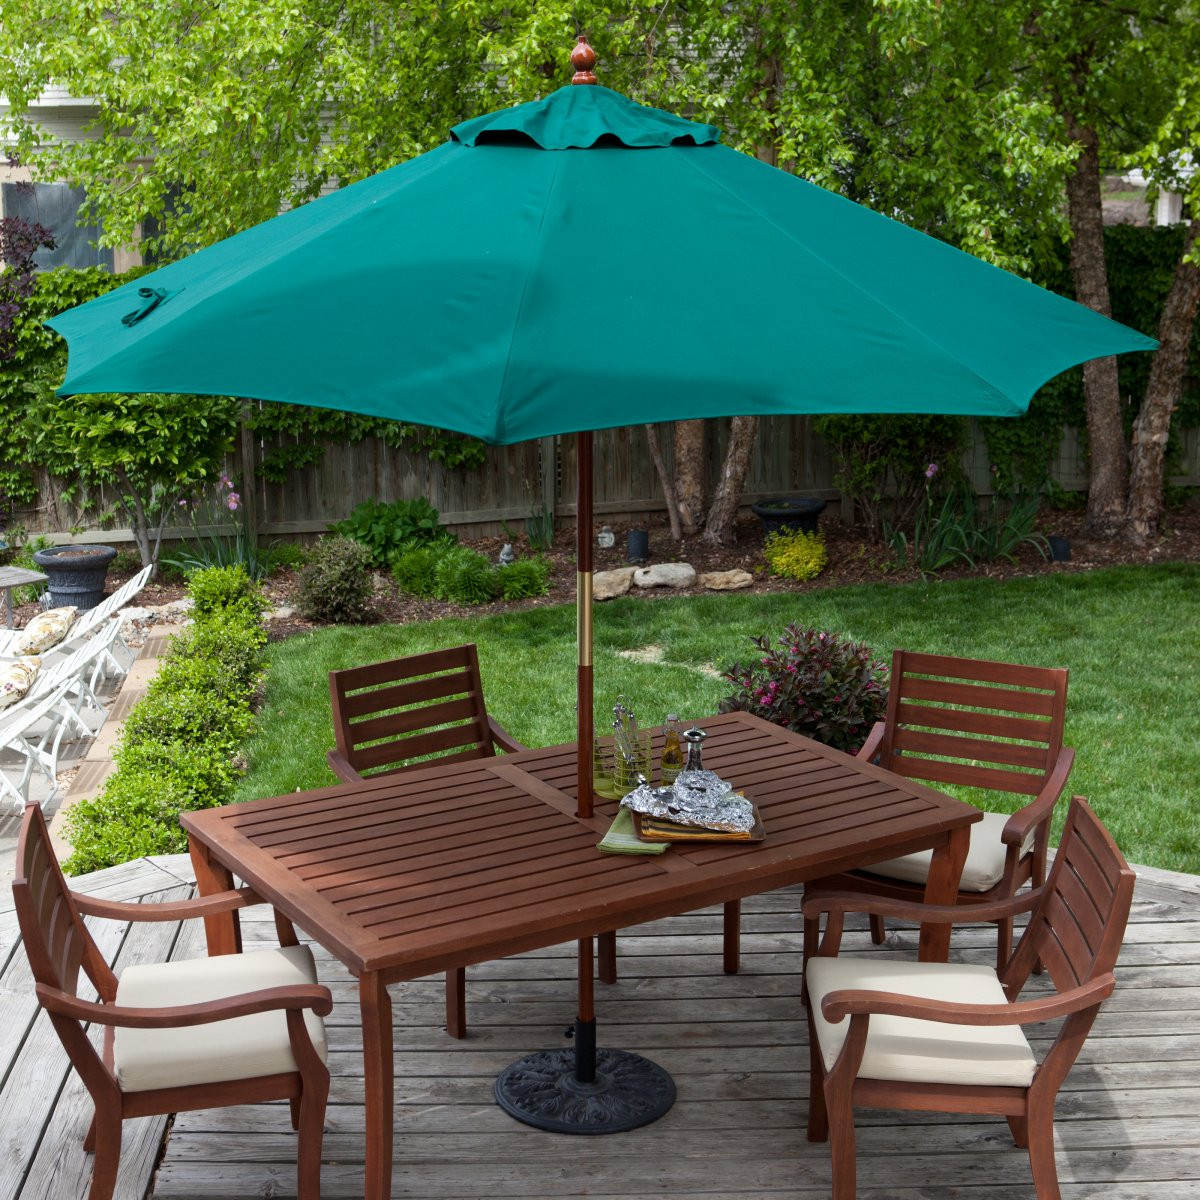 Best ideas about Walmart Patio Table
. Save or Pin Stylish Umbrella Patio Table The Best Outdoor Walmart Ring Now.